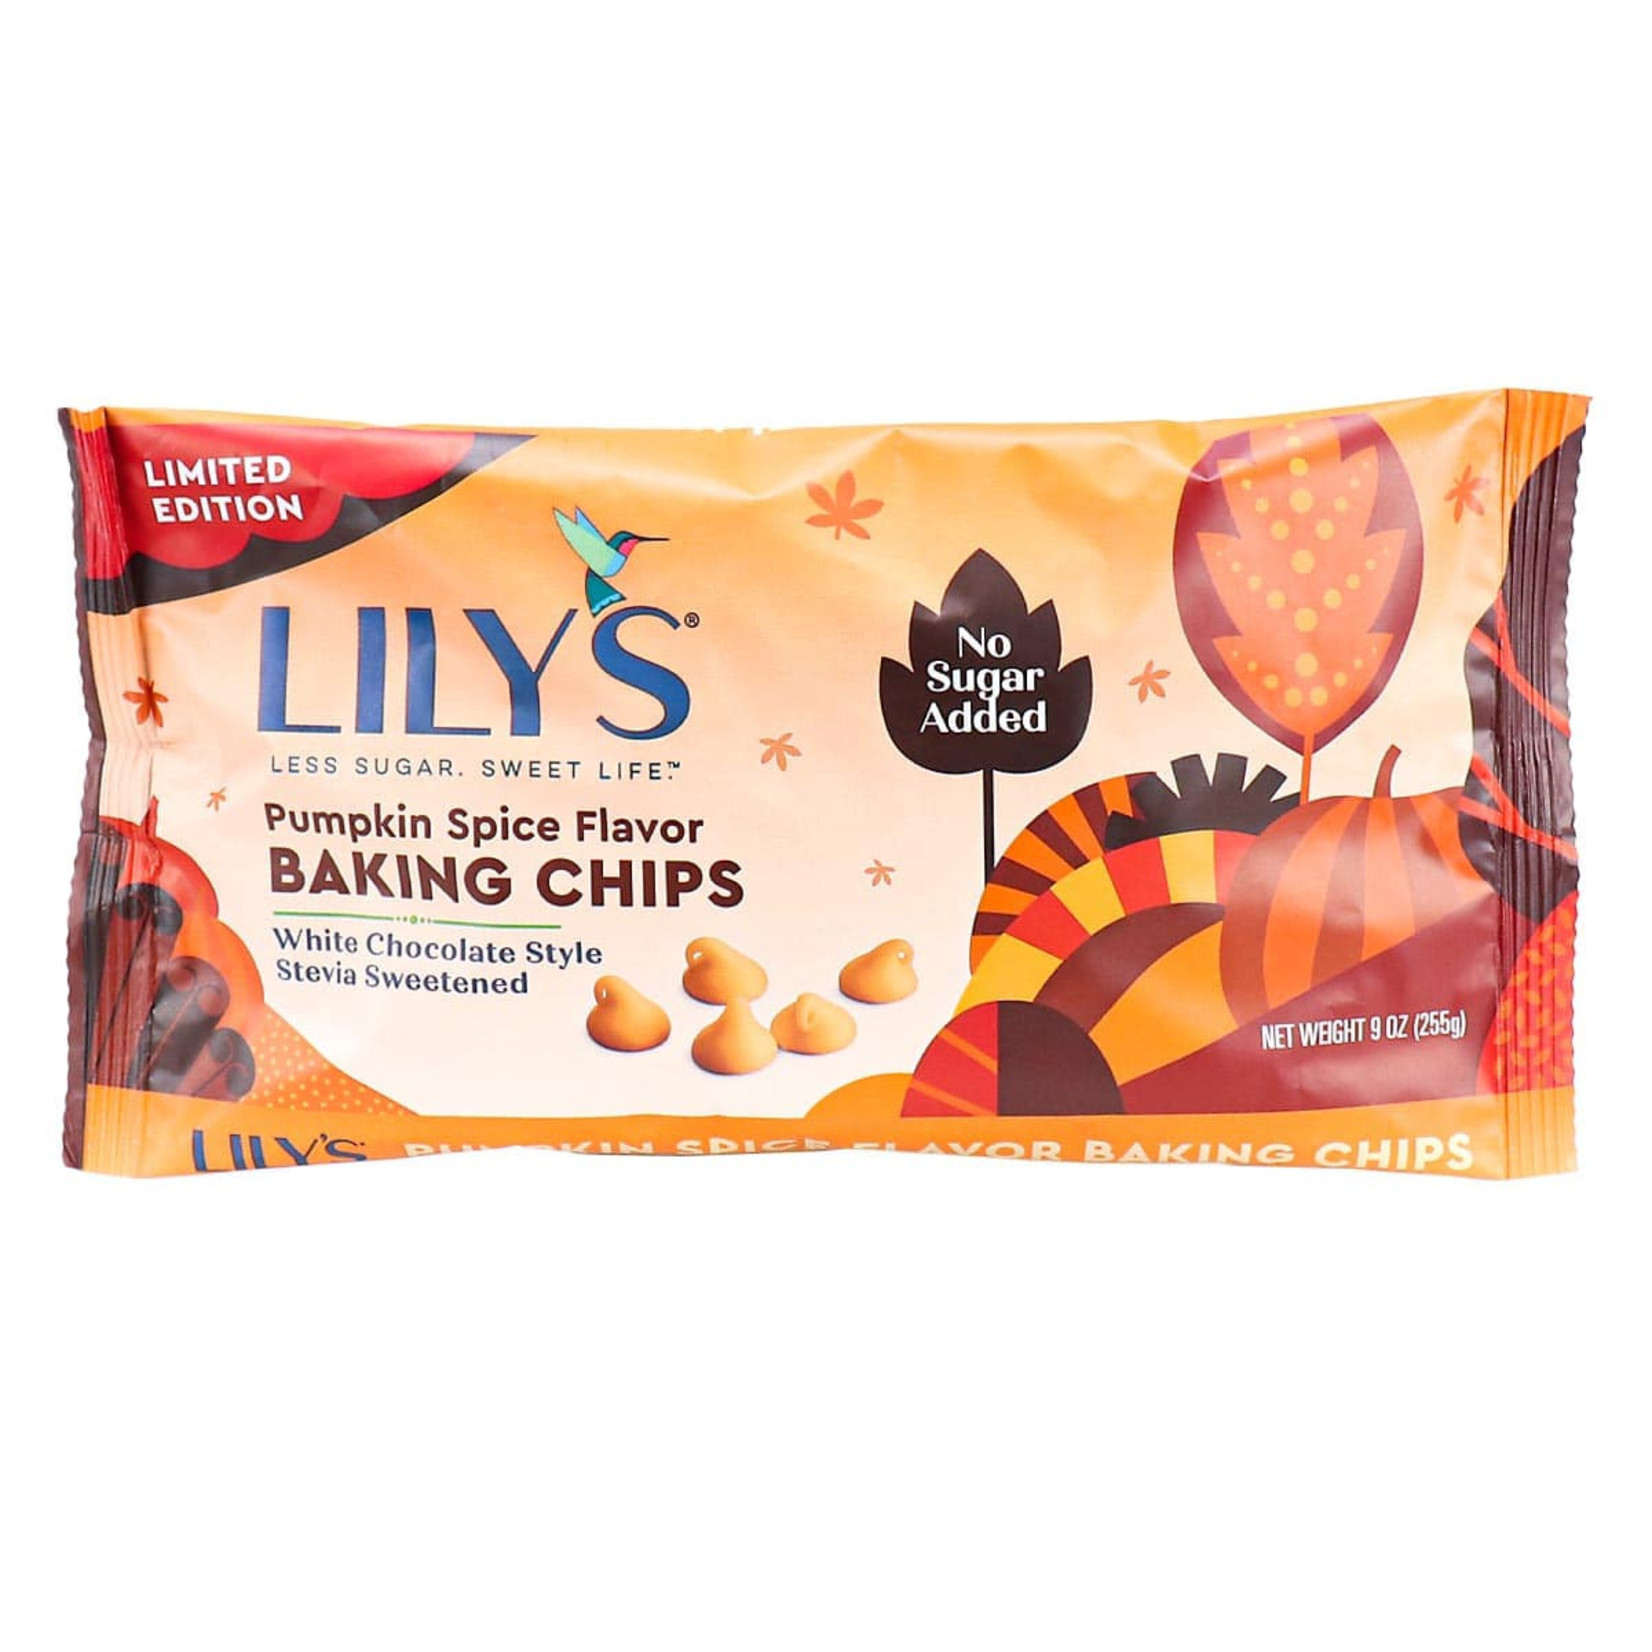 Lillys Lily’s Pumpkin Spice White Chocolate Style Baking Chips